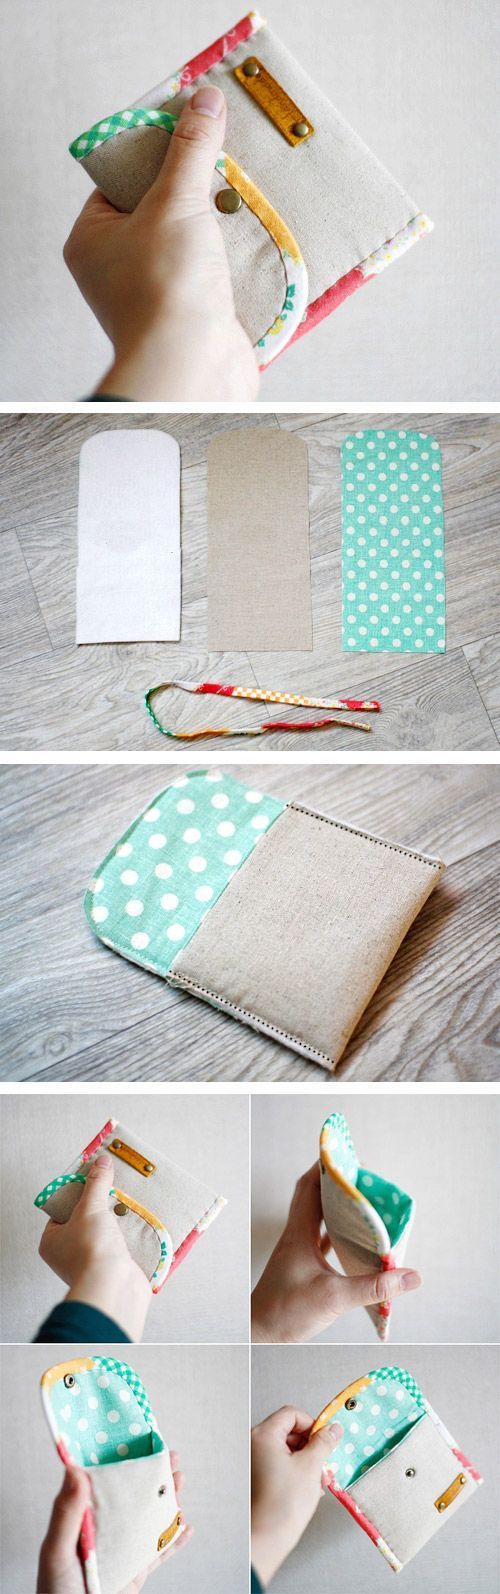 Coin Purse DIY tutorial in pictures. What a cute and simple idea. www.handmadiya.co…